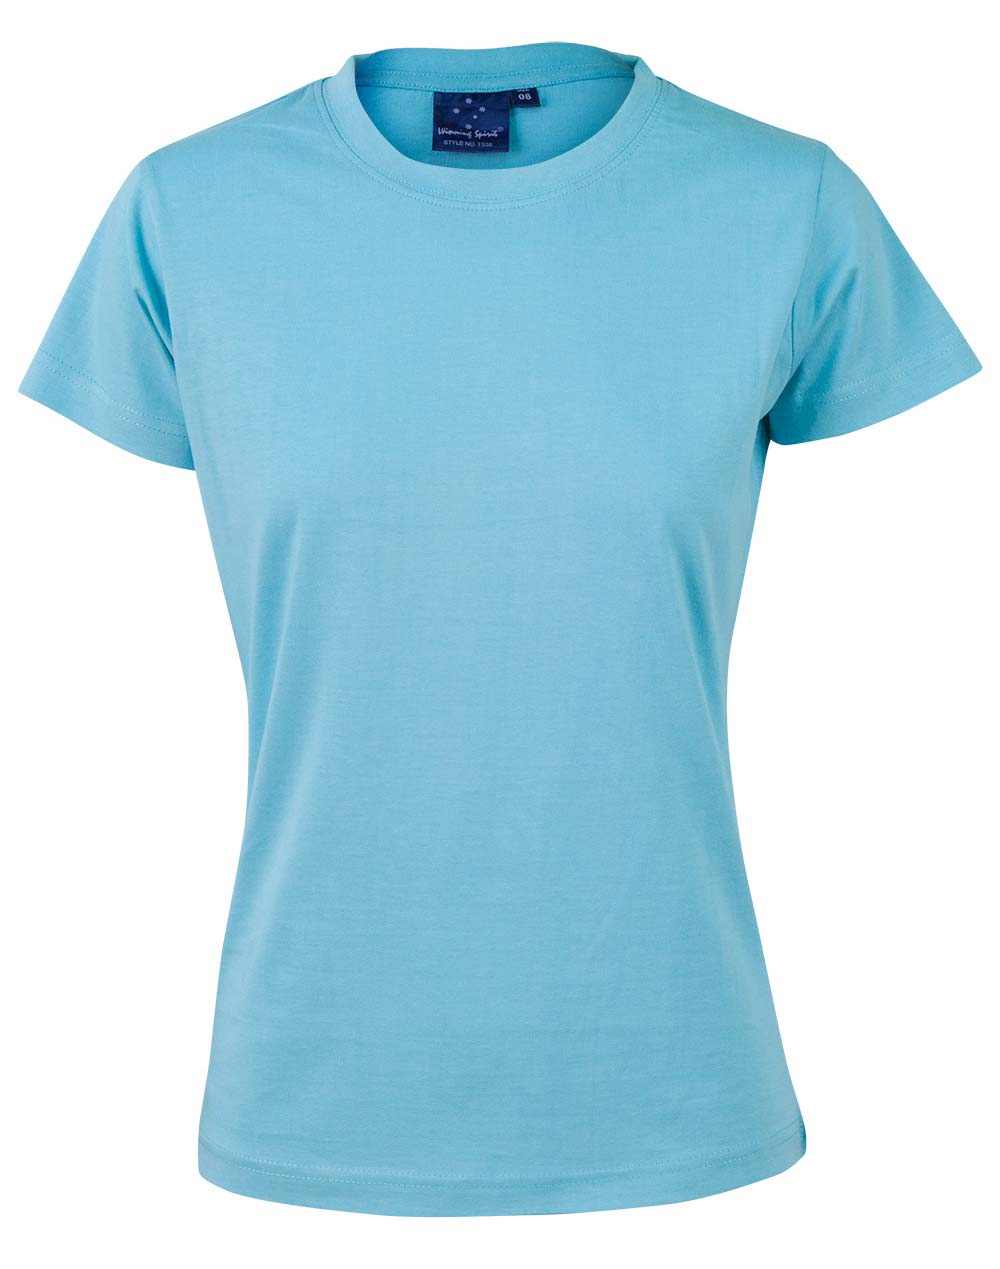 [TS38] Ladies' Cotton Semi Fitted Tee